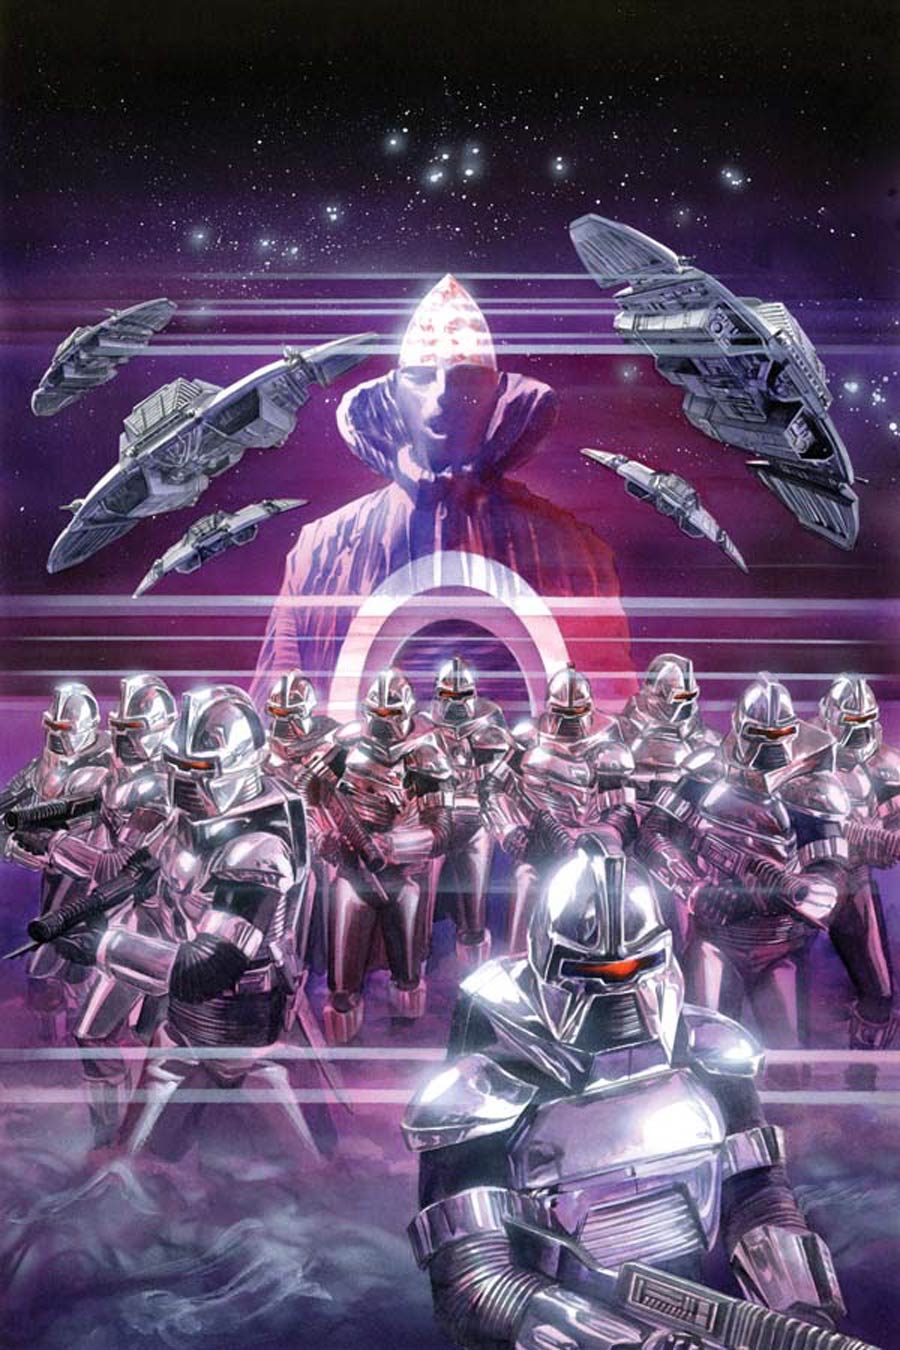 Battlestar Galactica Vol 5 #5 Cover C High-End Alex Ross Virgin Art Ultra-Limited Cover (ONLY 25 COPIES IN EXISTENCE!)